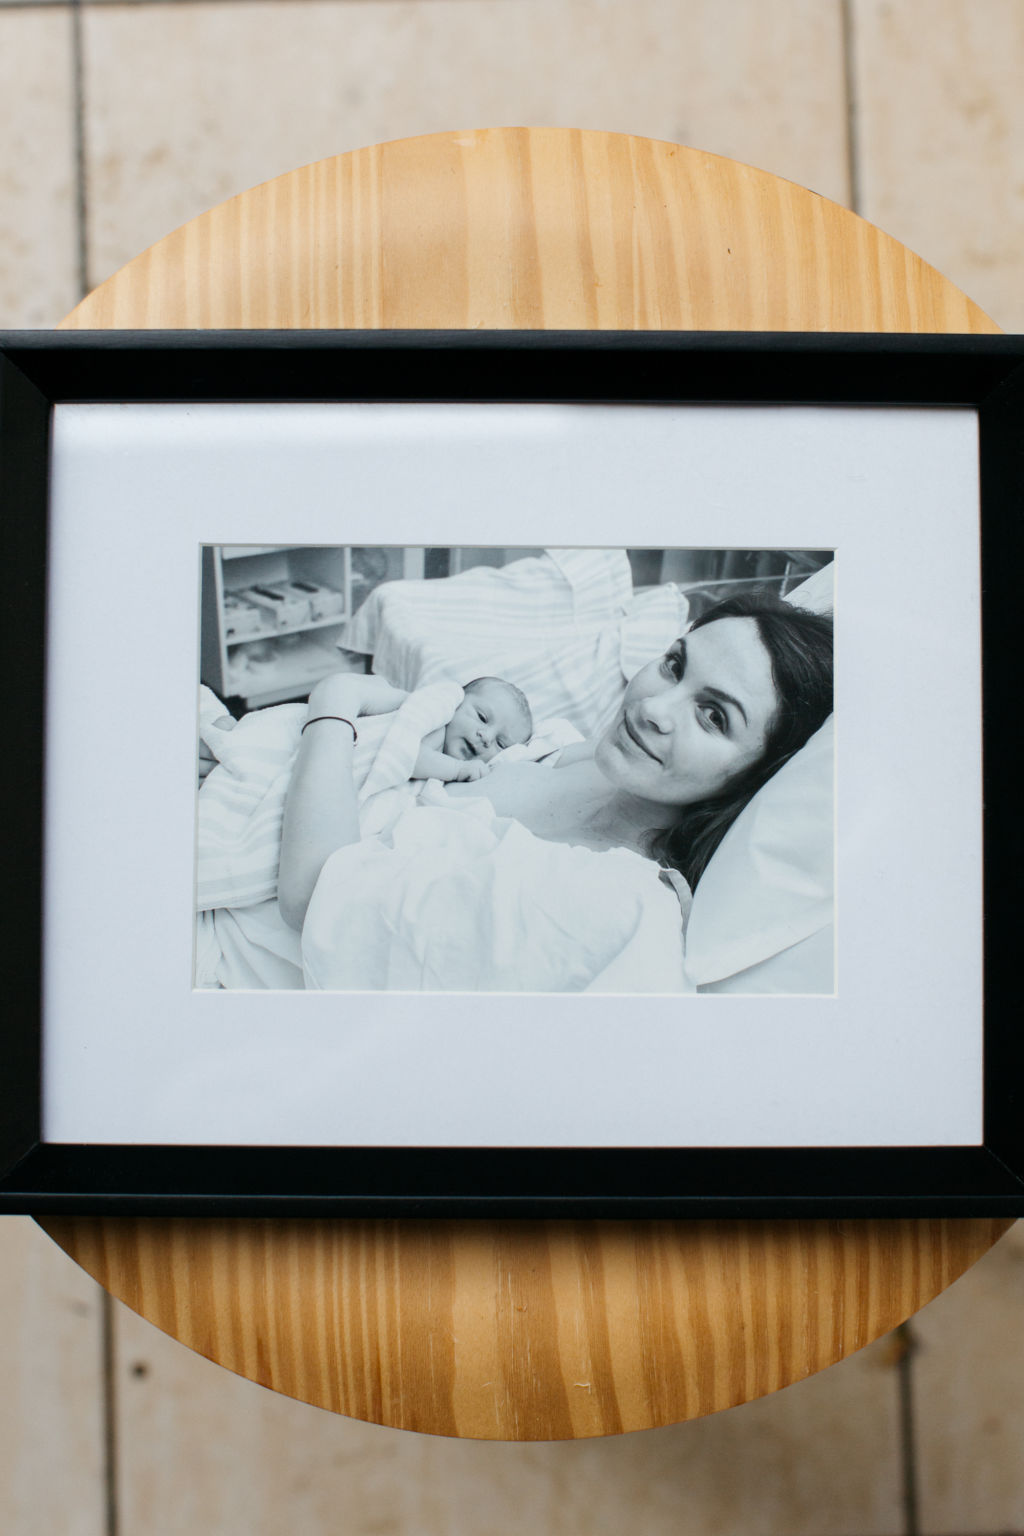 'I have that framed on my bedside table, my two girls.' Photo: Rachel Kara